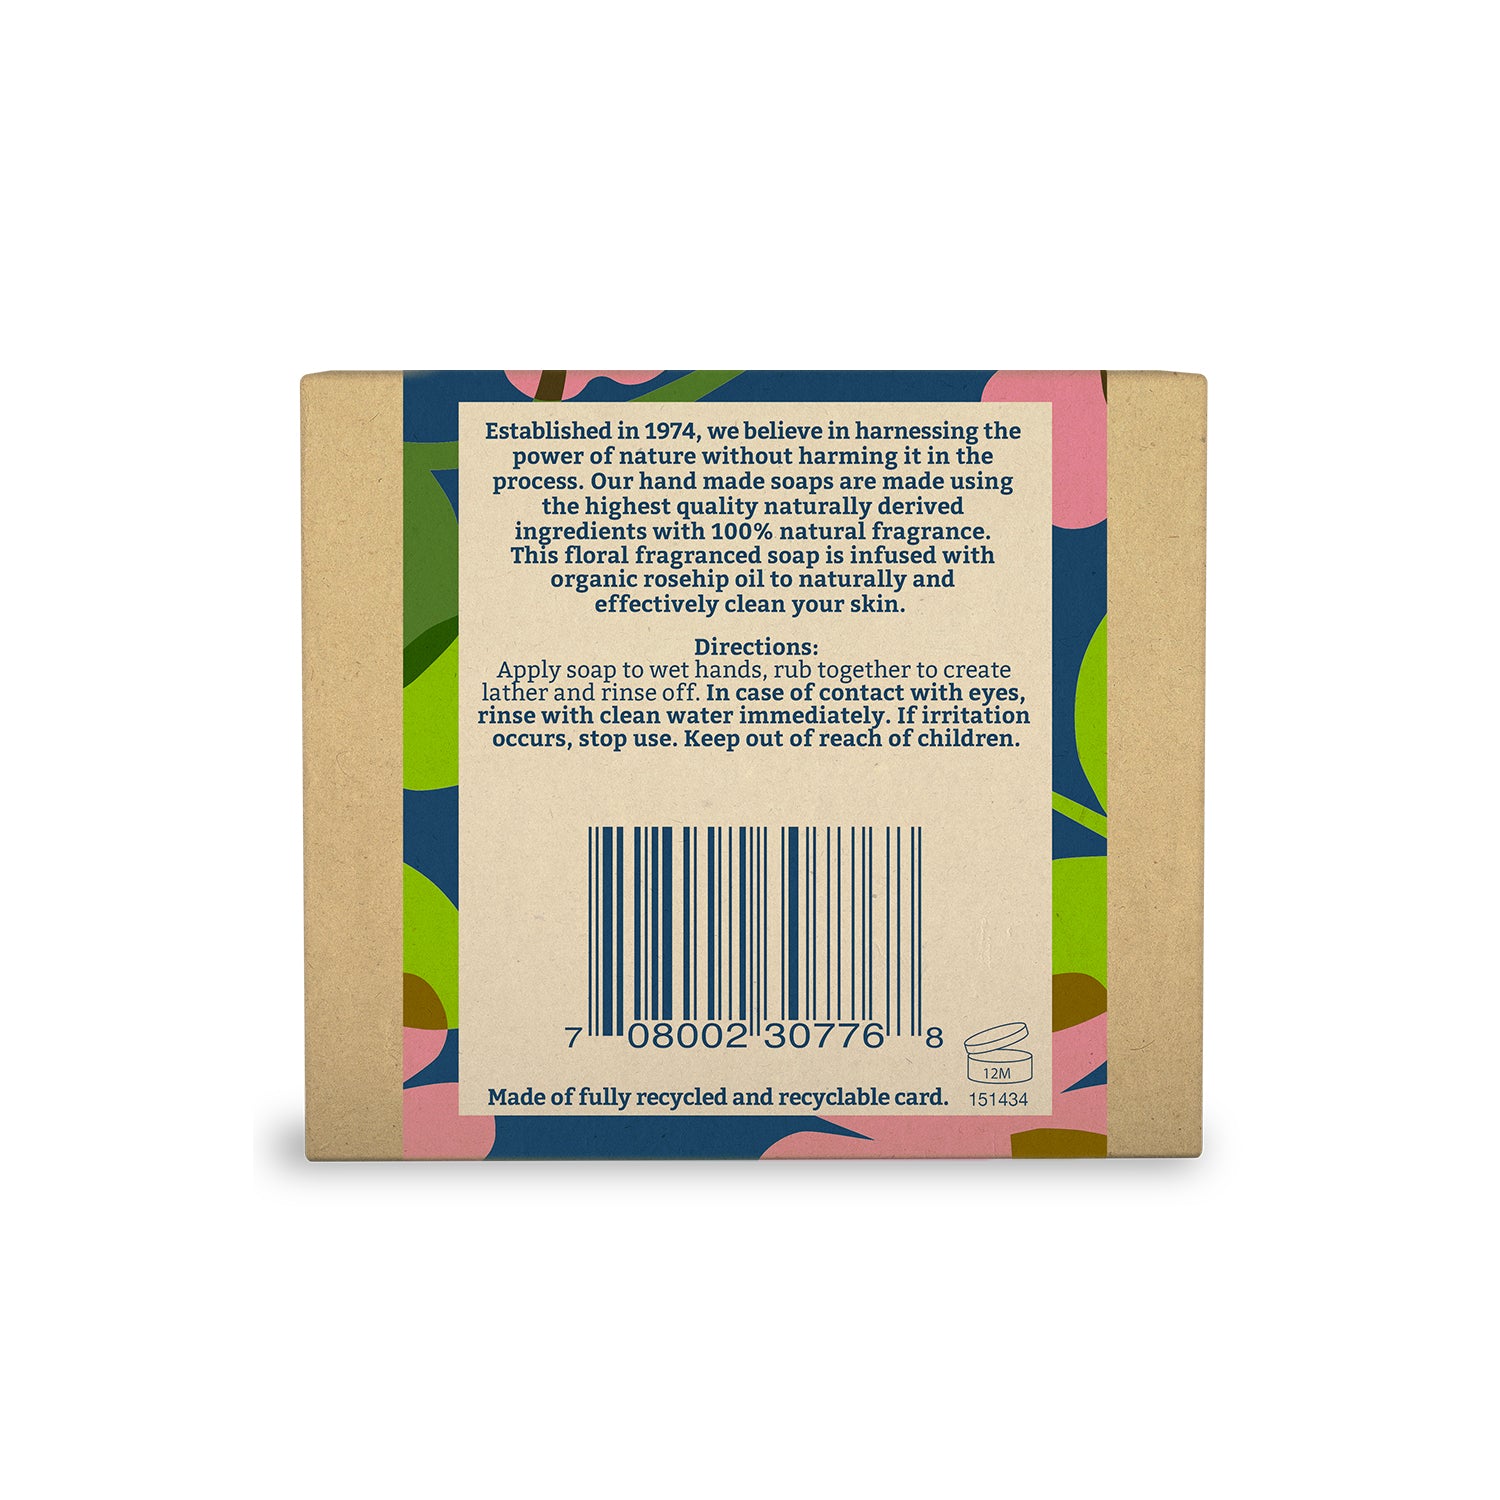 Faith in Nature Boxed Soap 100g - Wild Rose